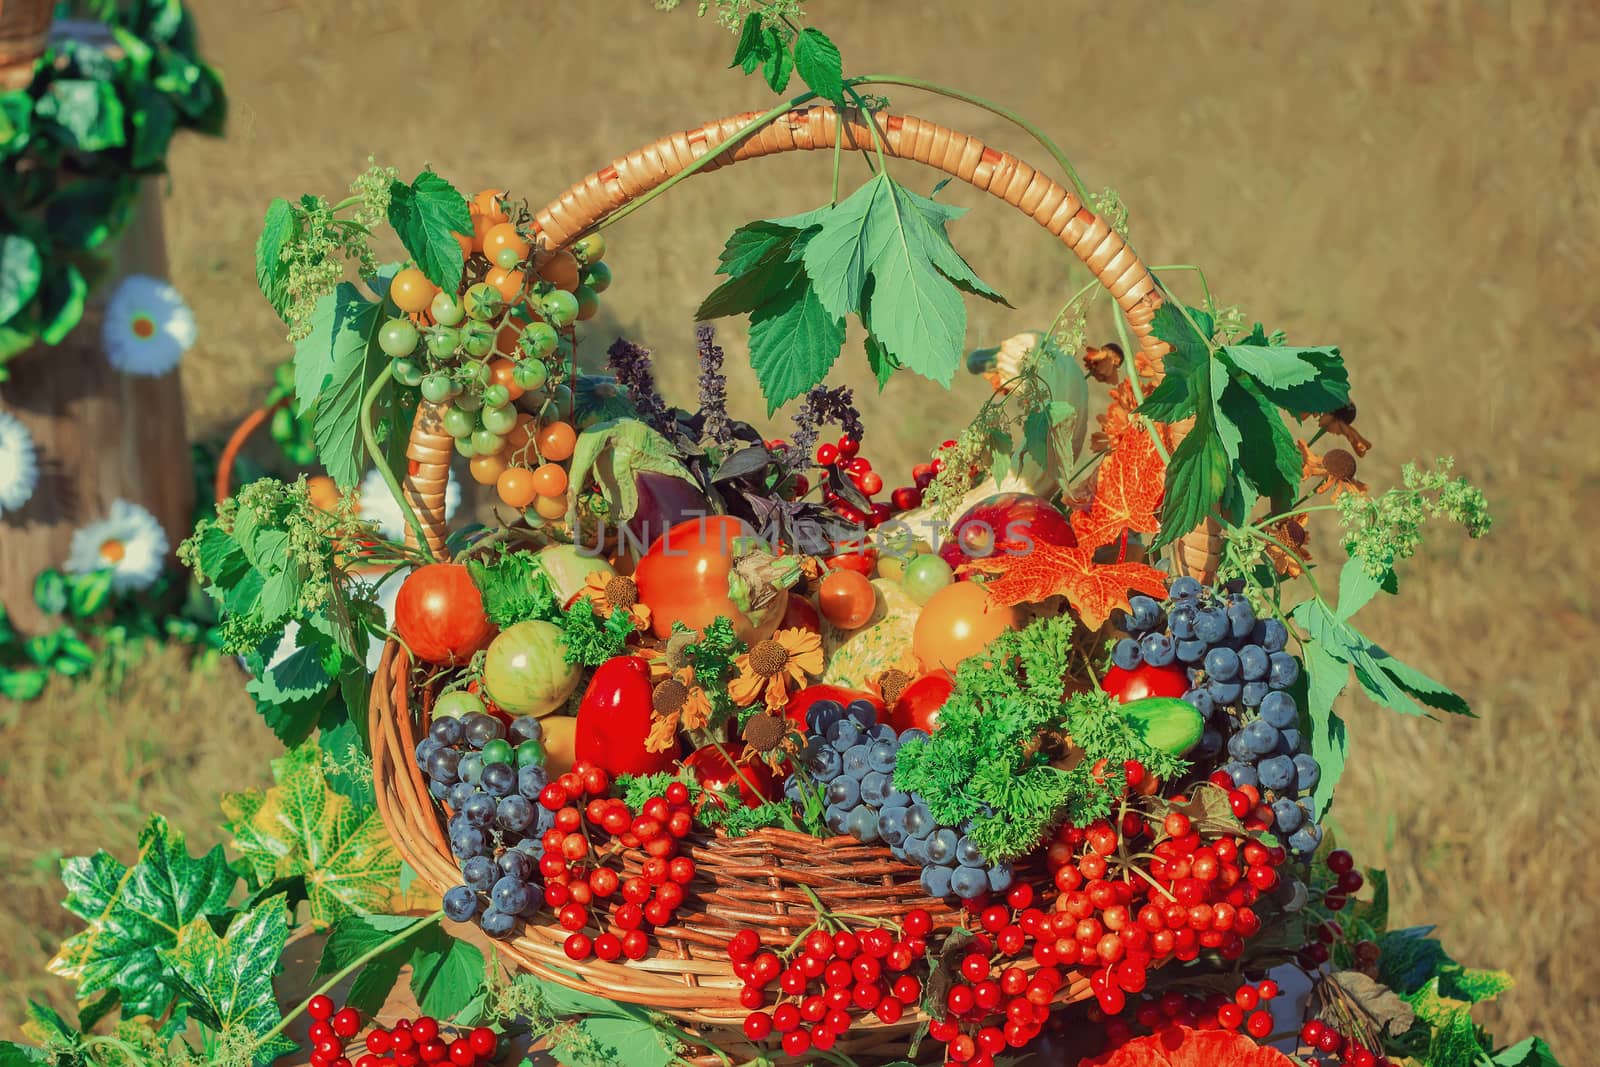 Large ripe apples , grapes, berries and vegetables are sold in beautifully decorated wicker basket at the fair.